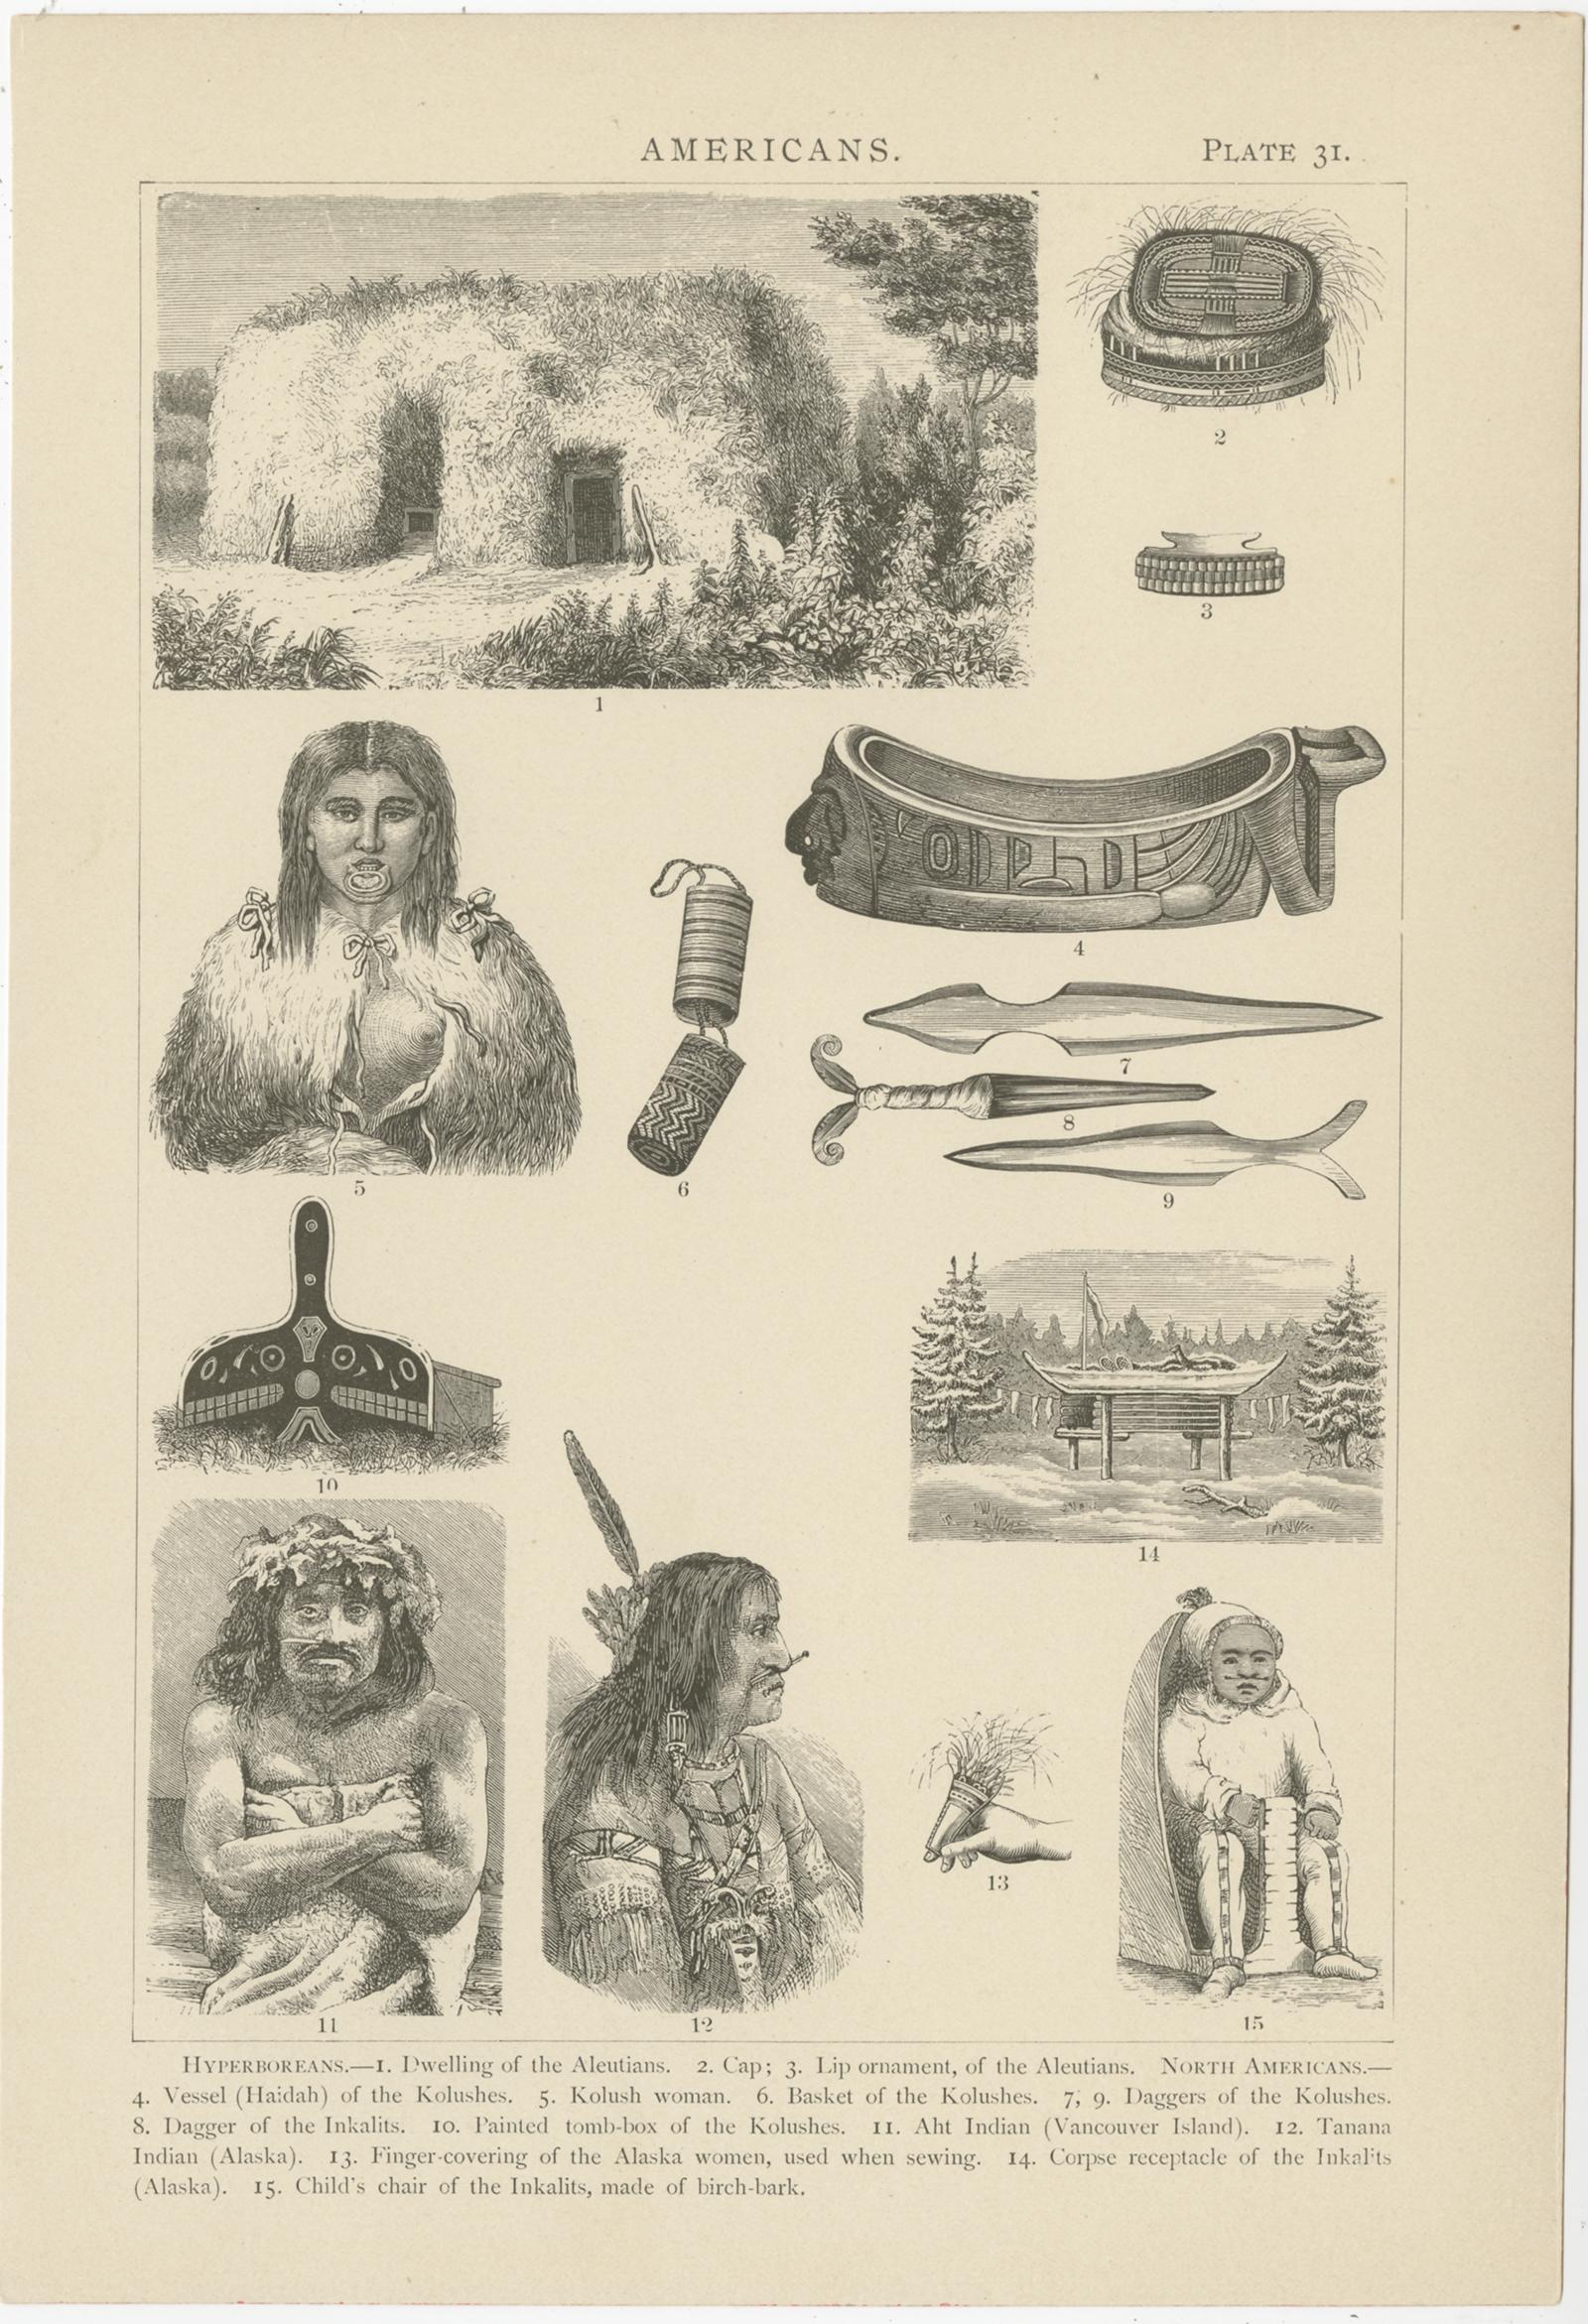 Set of three antique prints depicting various scenes, figures, and objects of Canada, Alaska and other region of North America. These prints originate from 'Iconographic Encyclopaedia of the Arts and Sciences' by Johann Heck and Daniel Brinton.